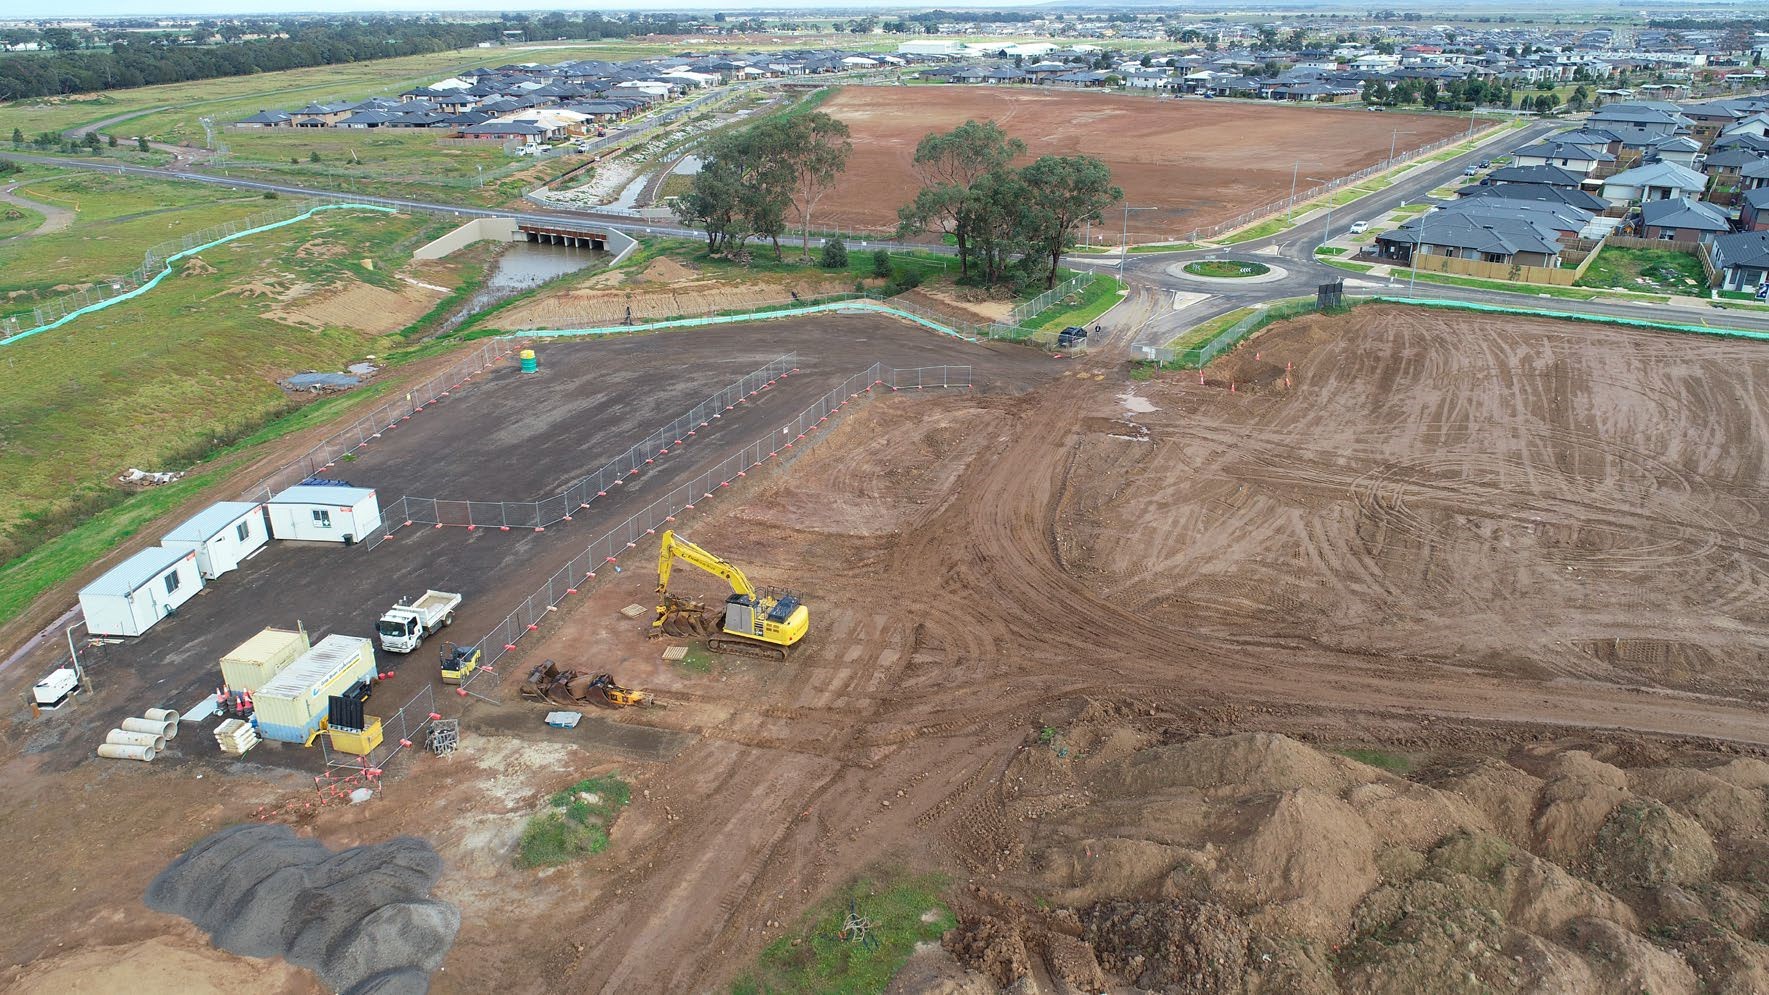 Drone photo of Stages 27-29 taken on 6 July 2020 looking west.